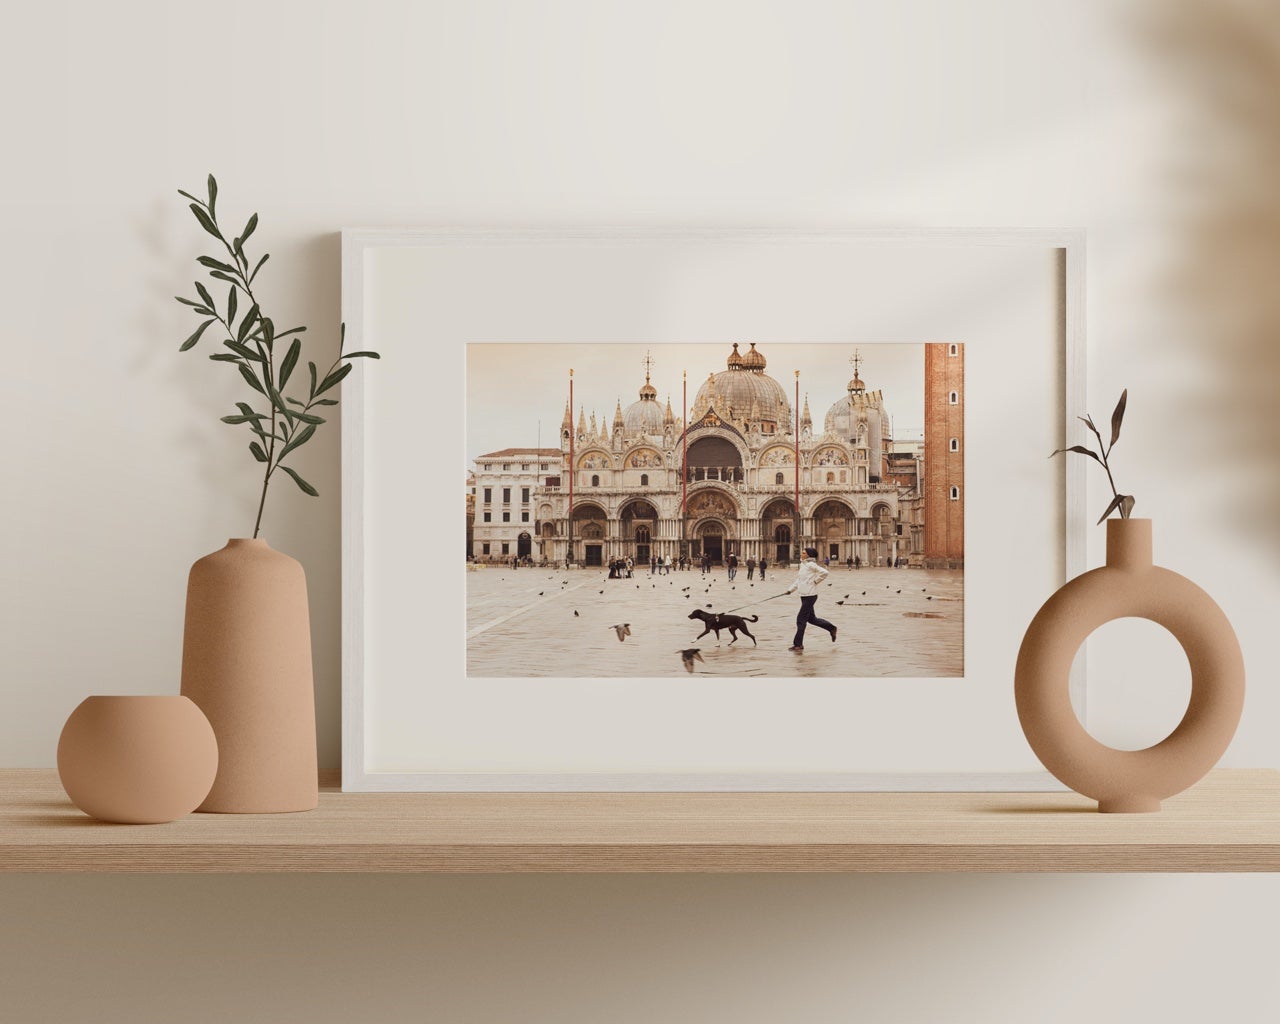 Matted Prints - "Piazza San Marco" | Matted Print